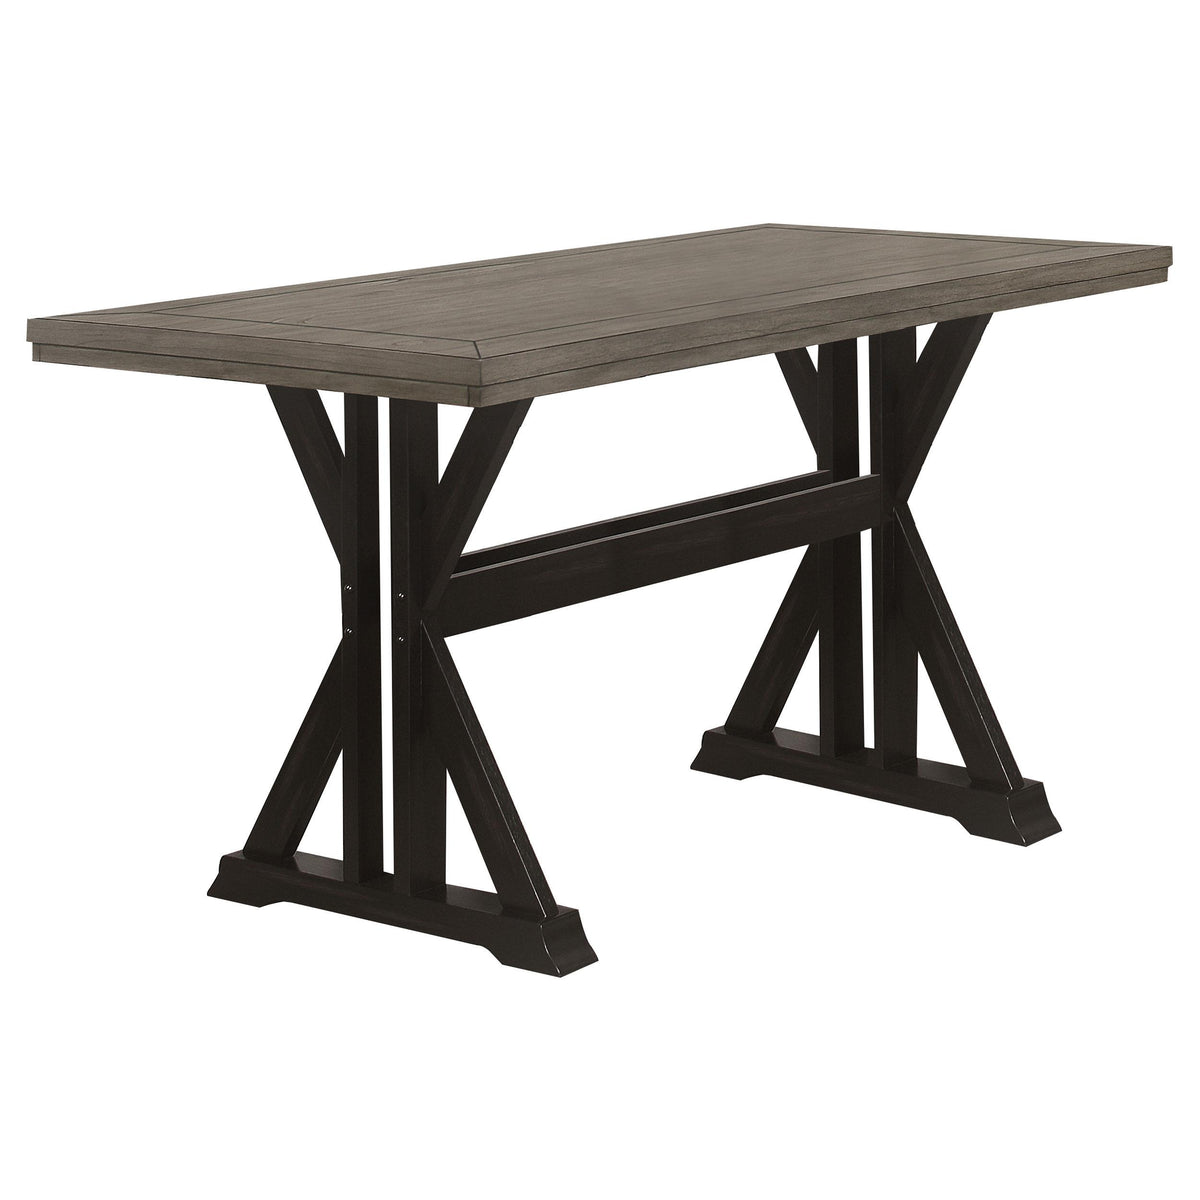 193498 COUNTER HT TABLE  Half Price Furniture